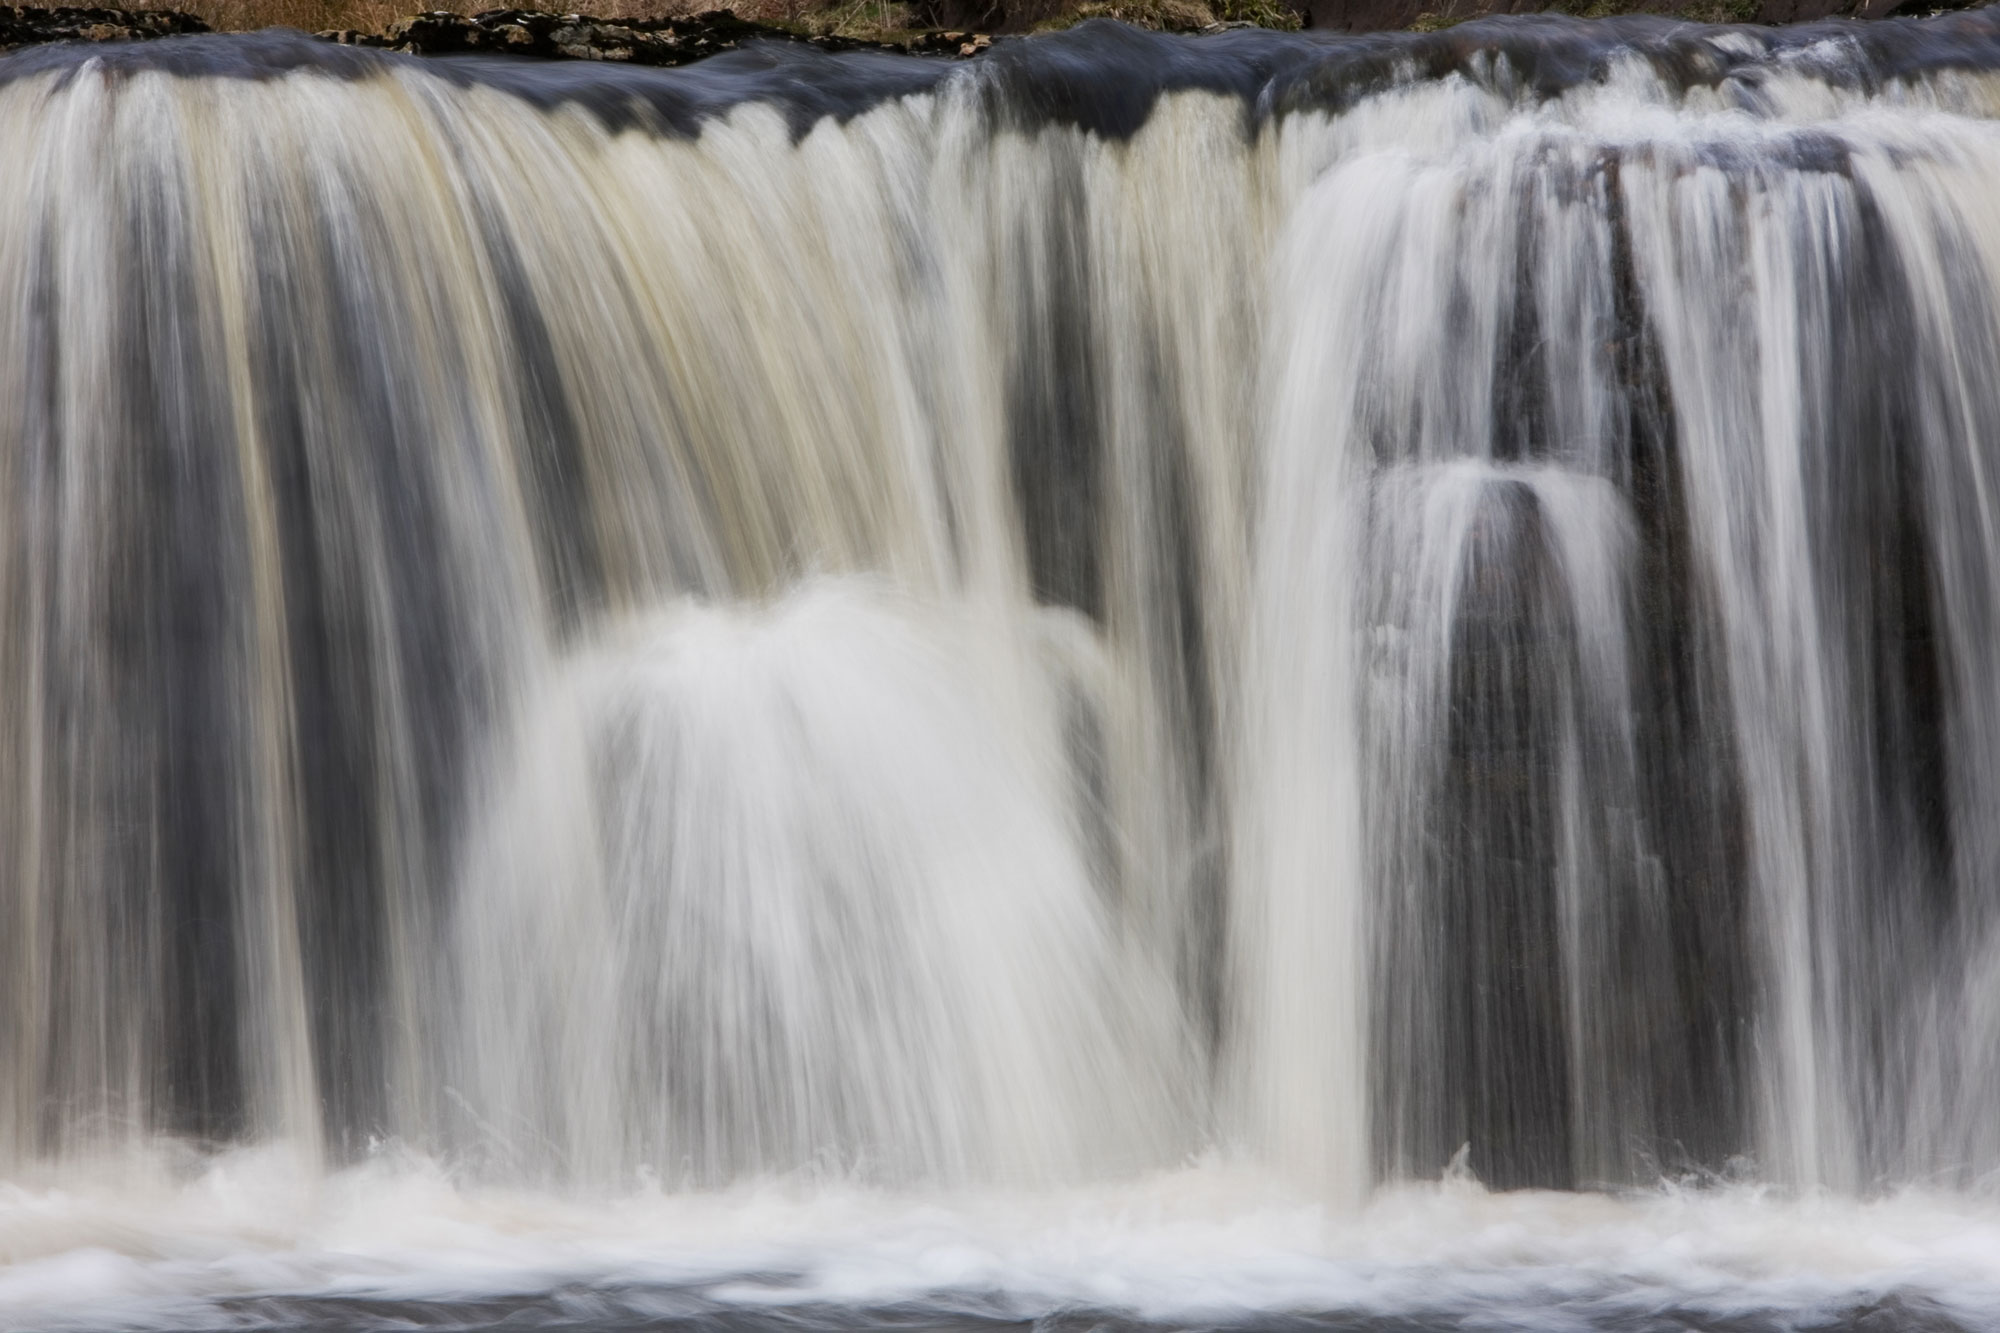 Another shot of the waterfall at Keld